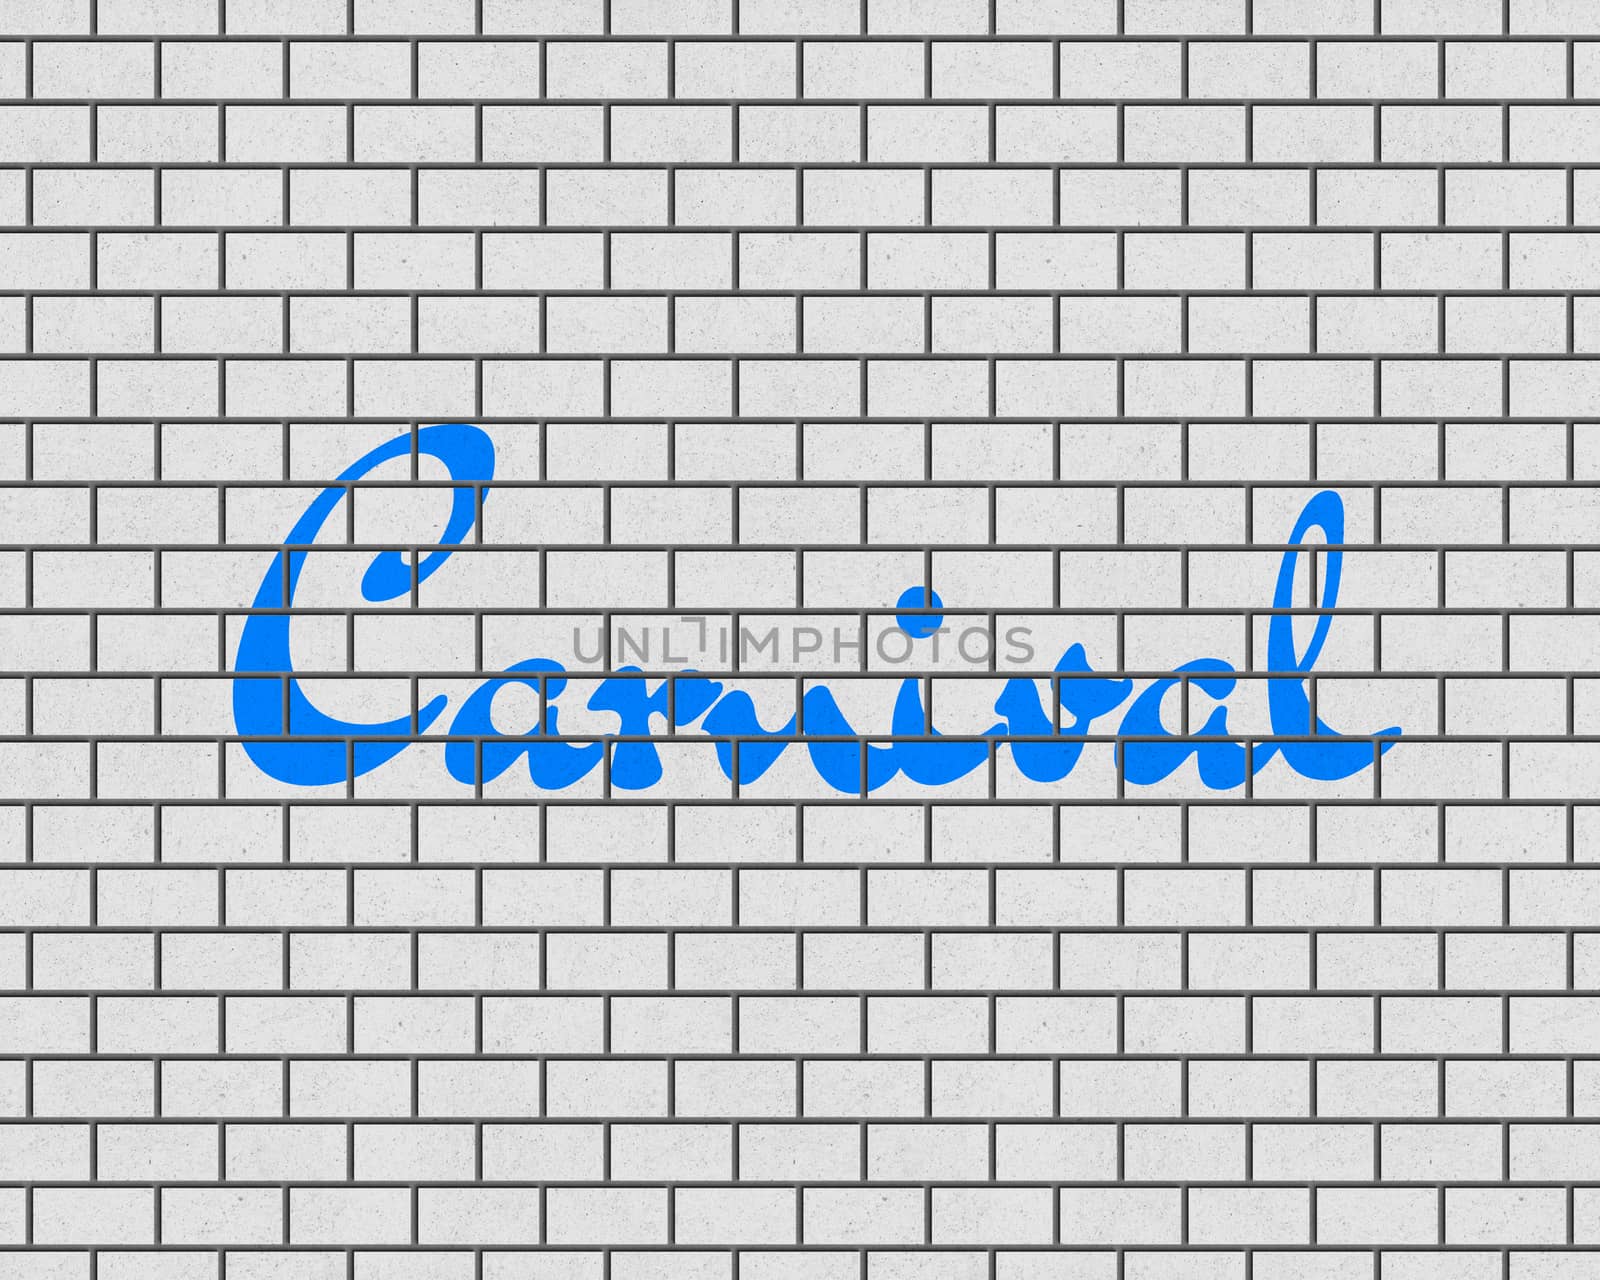 3D RENDERING OF Carnival WORDS ON WHITE PLAIN BRICK WALL